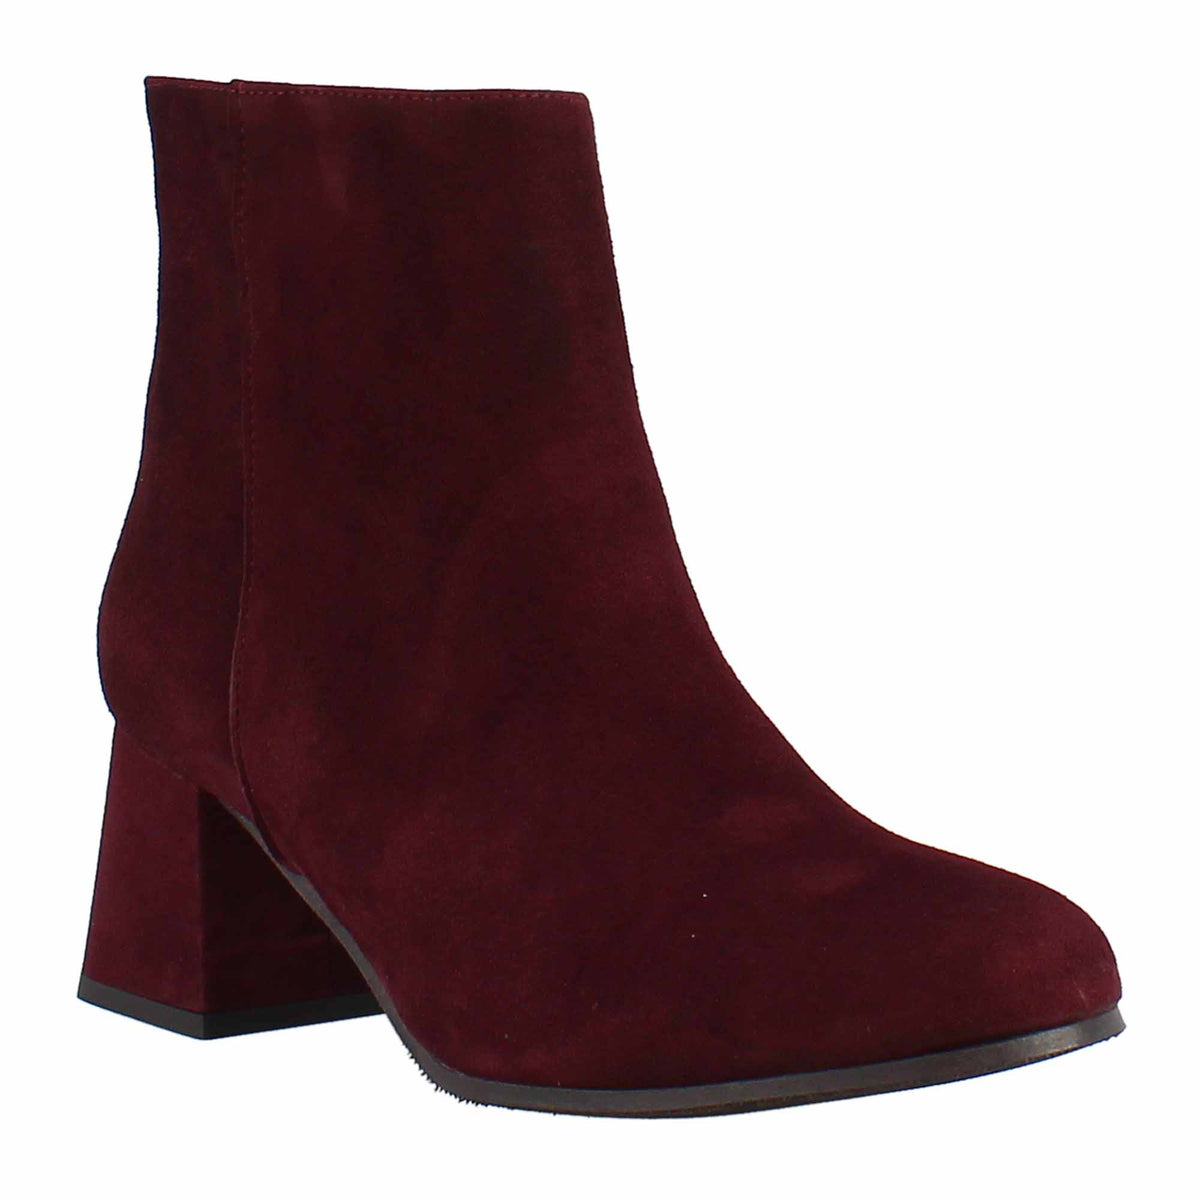 Handmade women's ankle boots in burgundy suede 